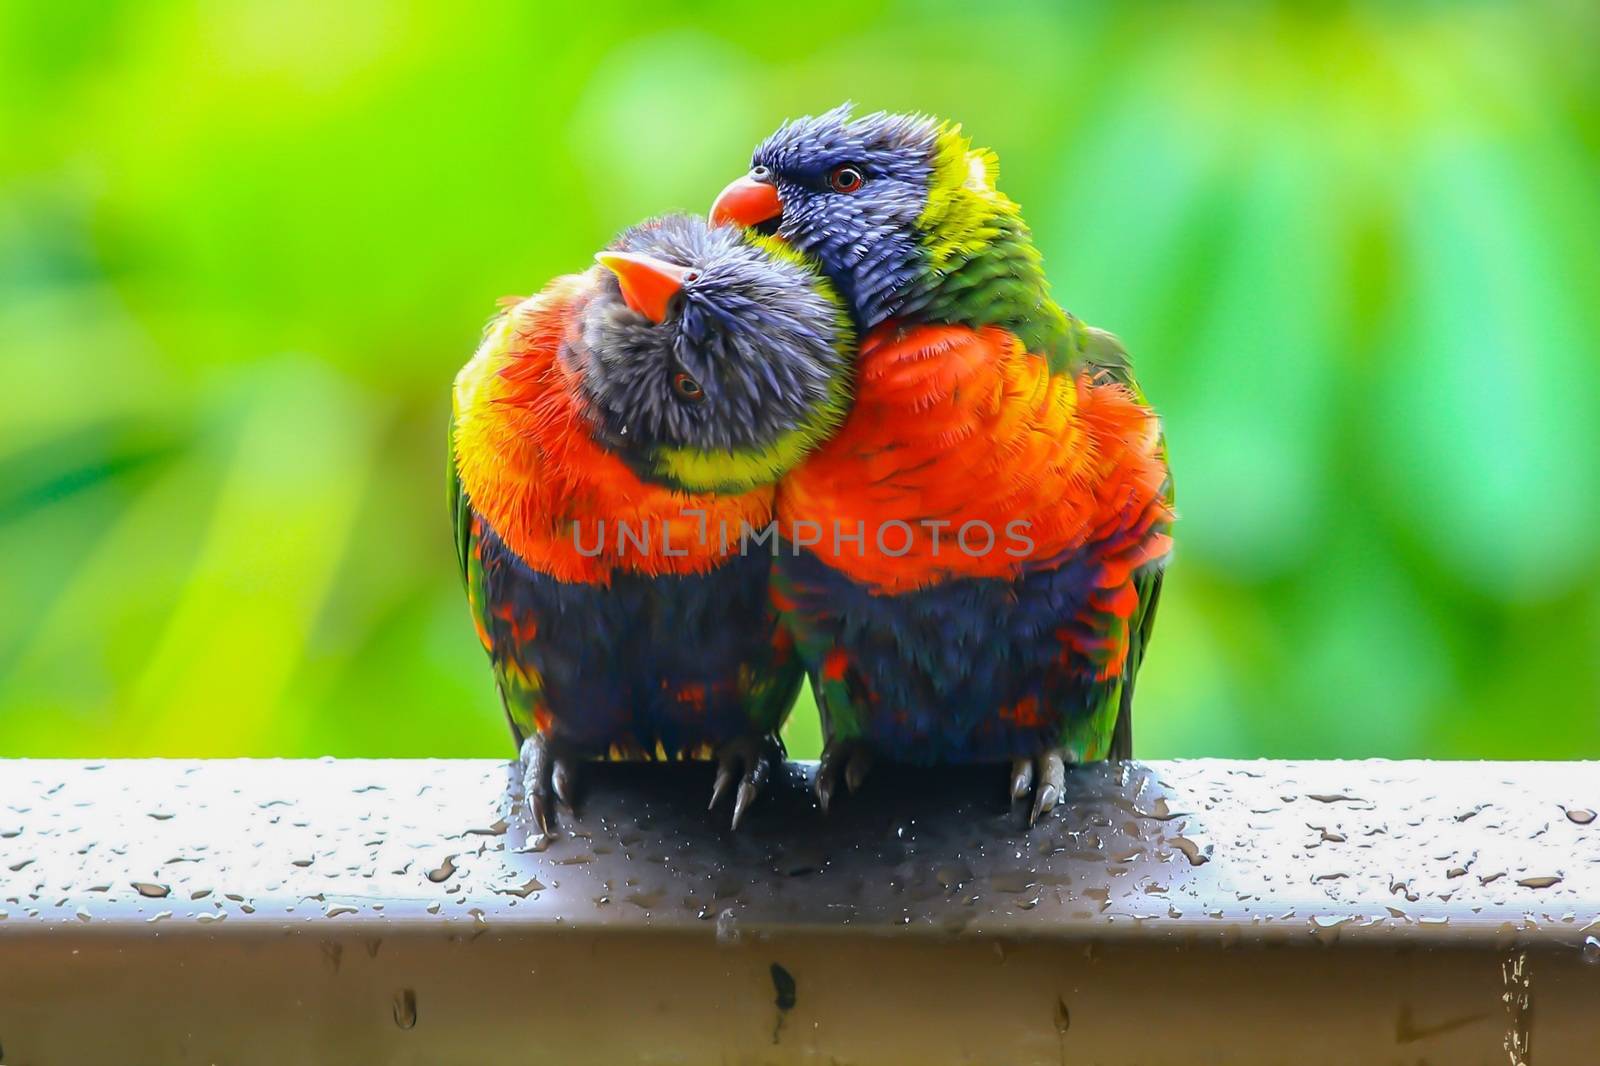 Rainbow lorikeets preening each other after the rain by blueandrew8000@hotmail.com